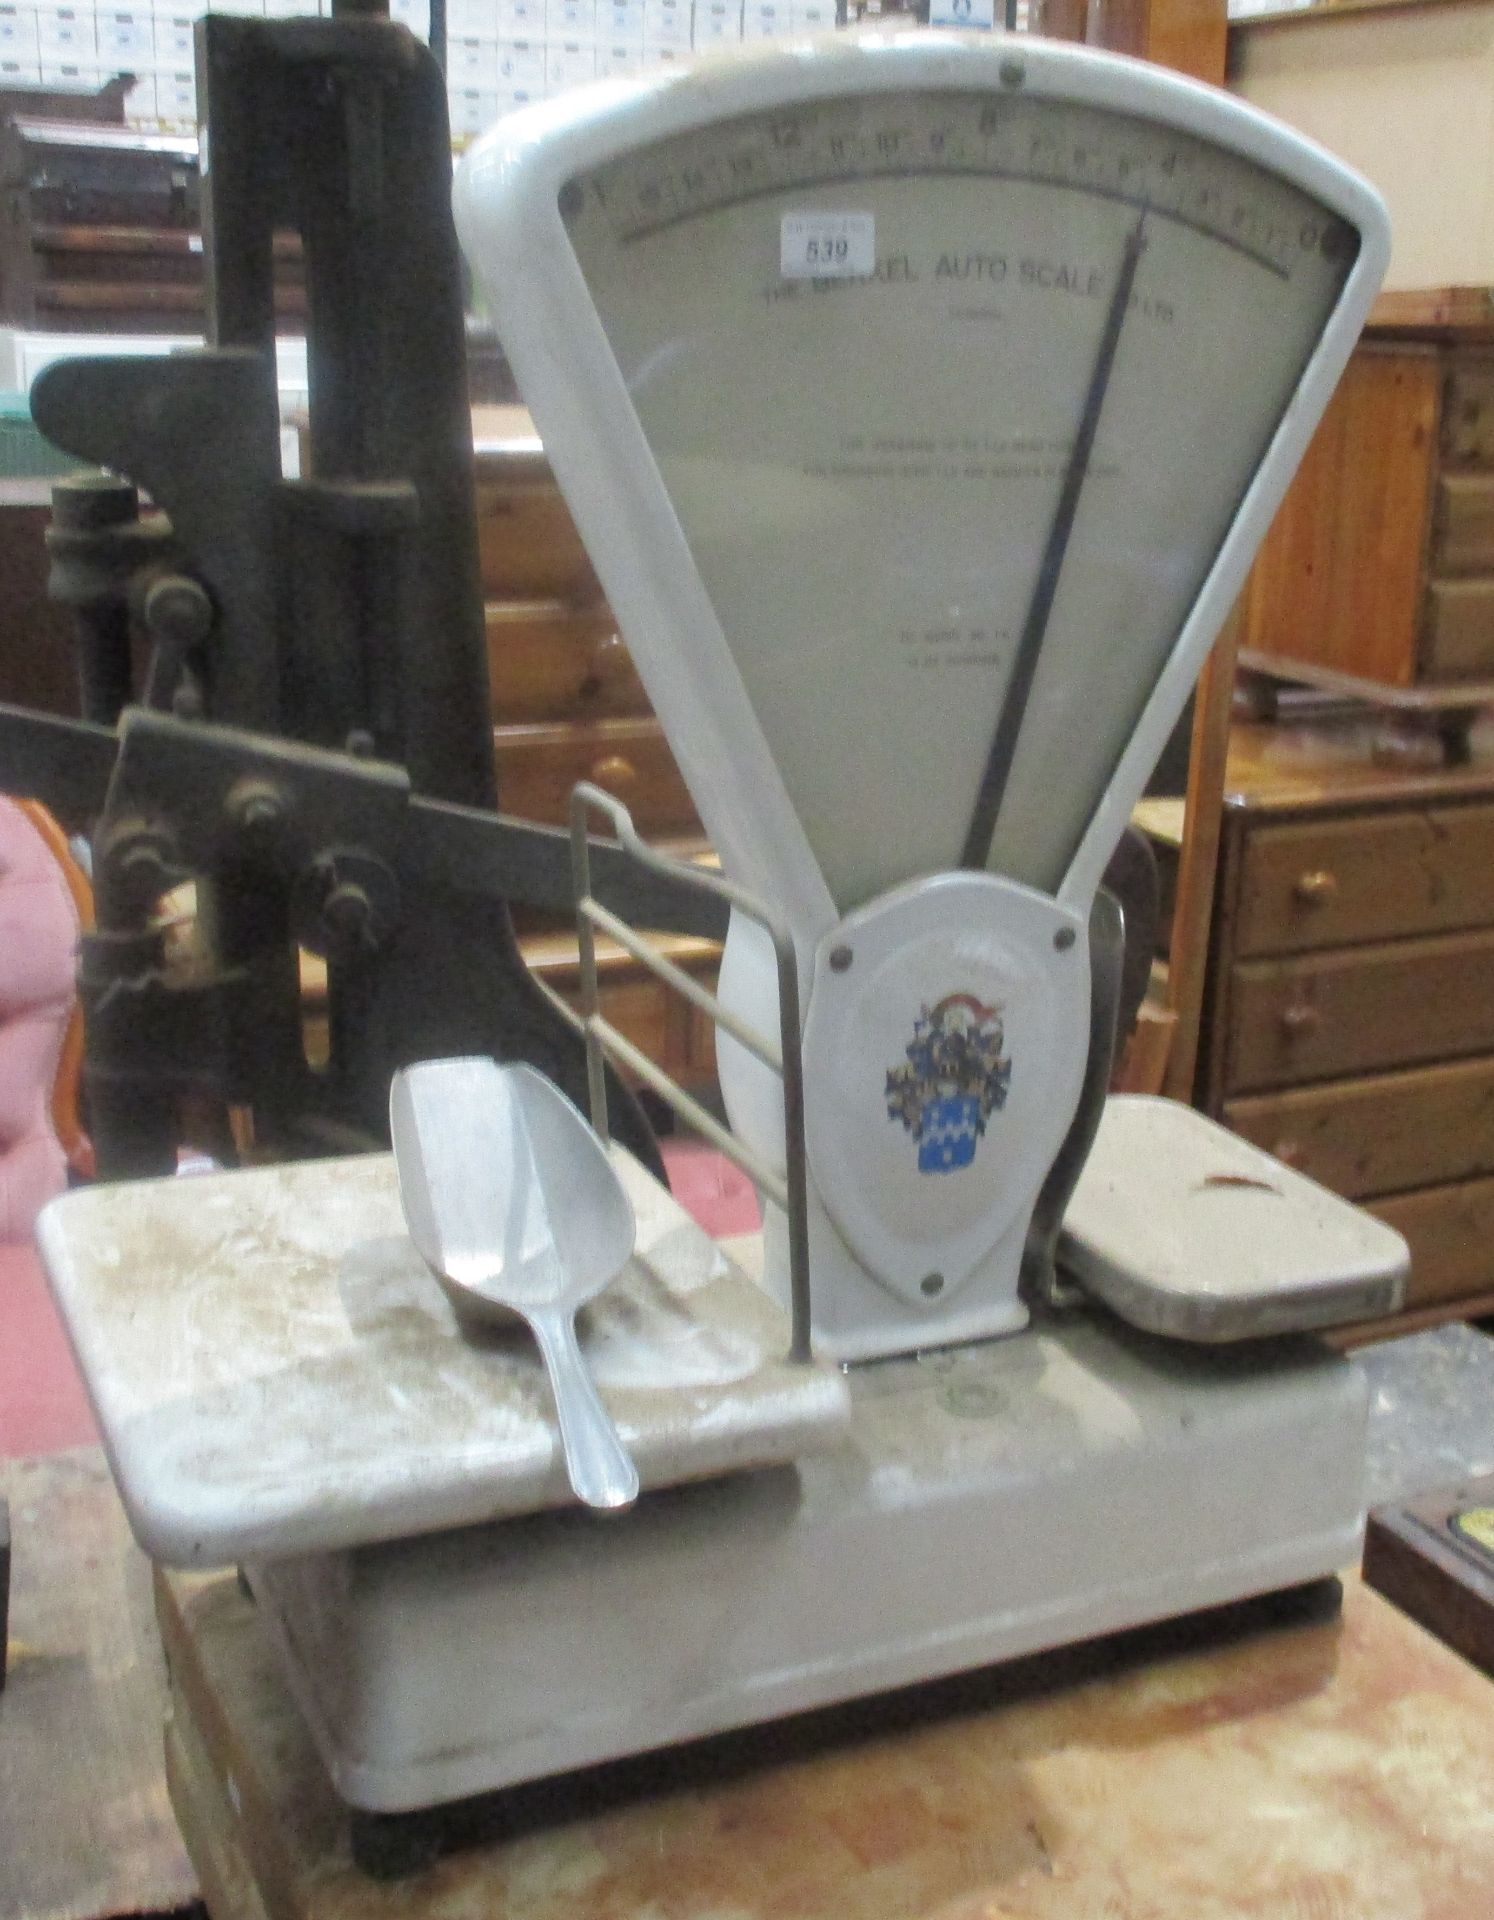 A set of Berkel Auto Scale Co Ltd shop scales to weigh 30lb by ¼oz divisions